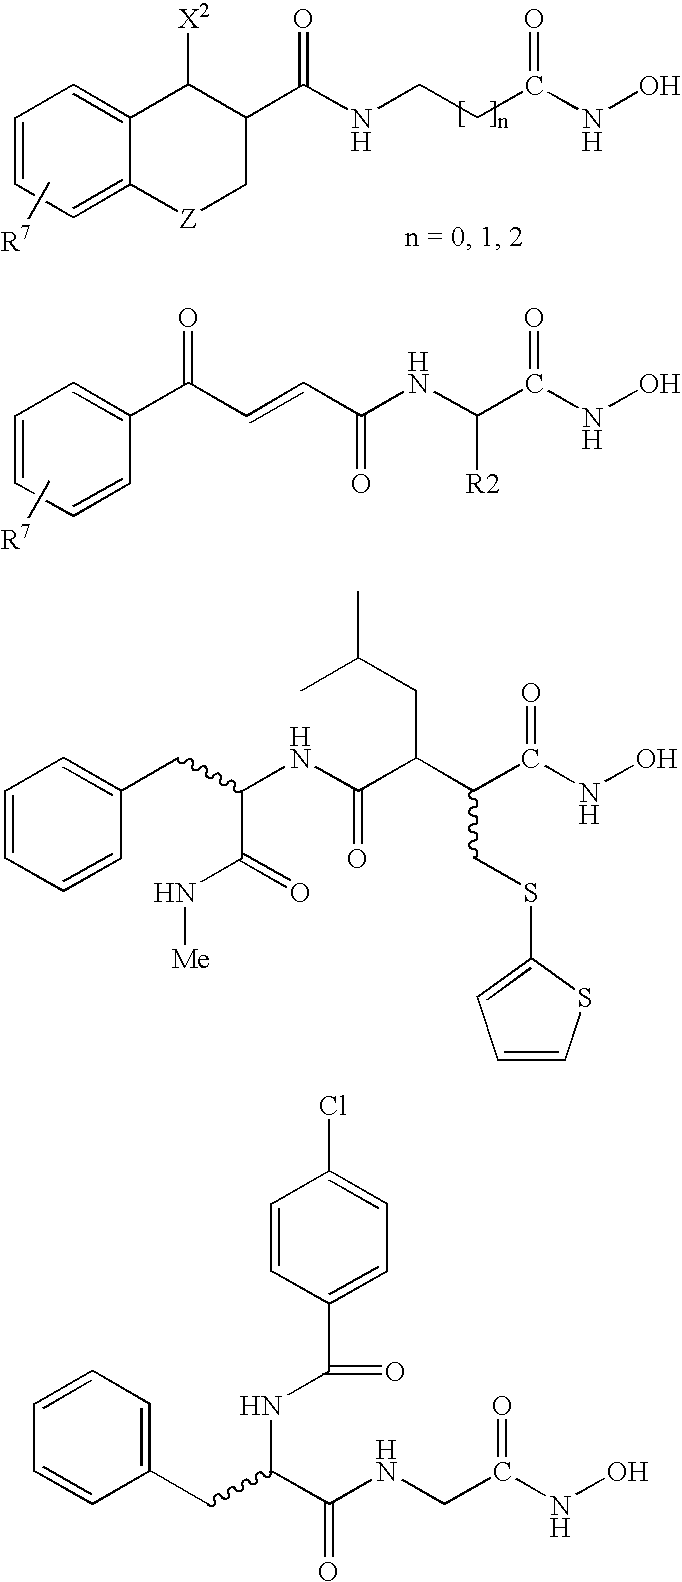 Carbamic acid compounds comprising a sulfonamide linkage as HDAC inhibitors